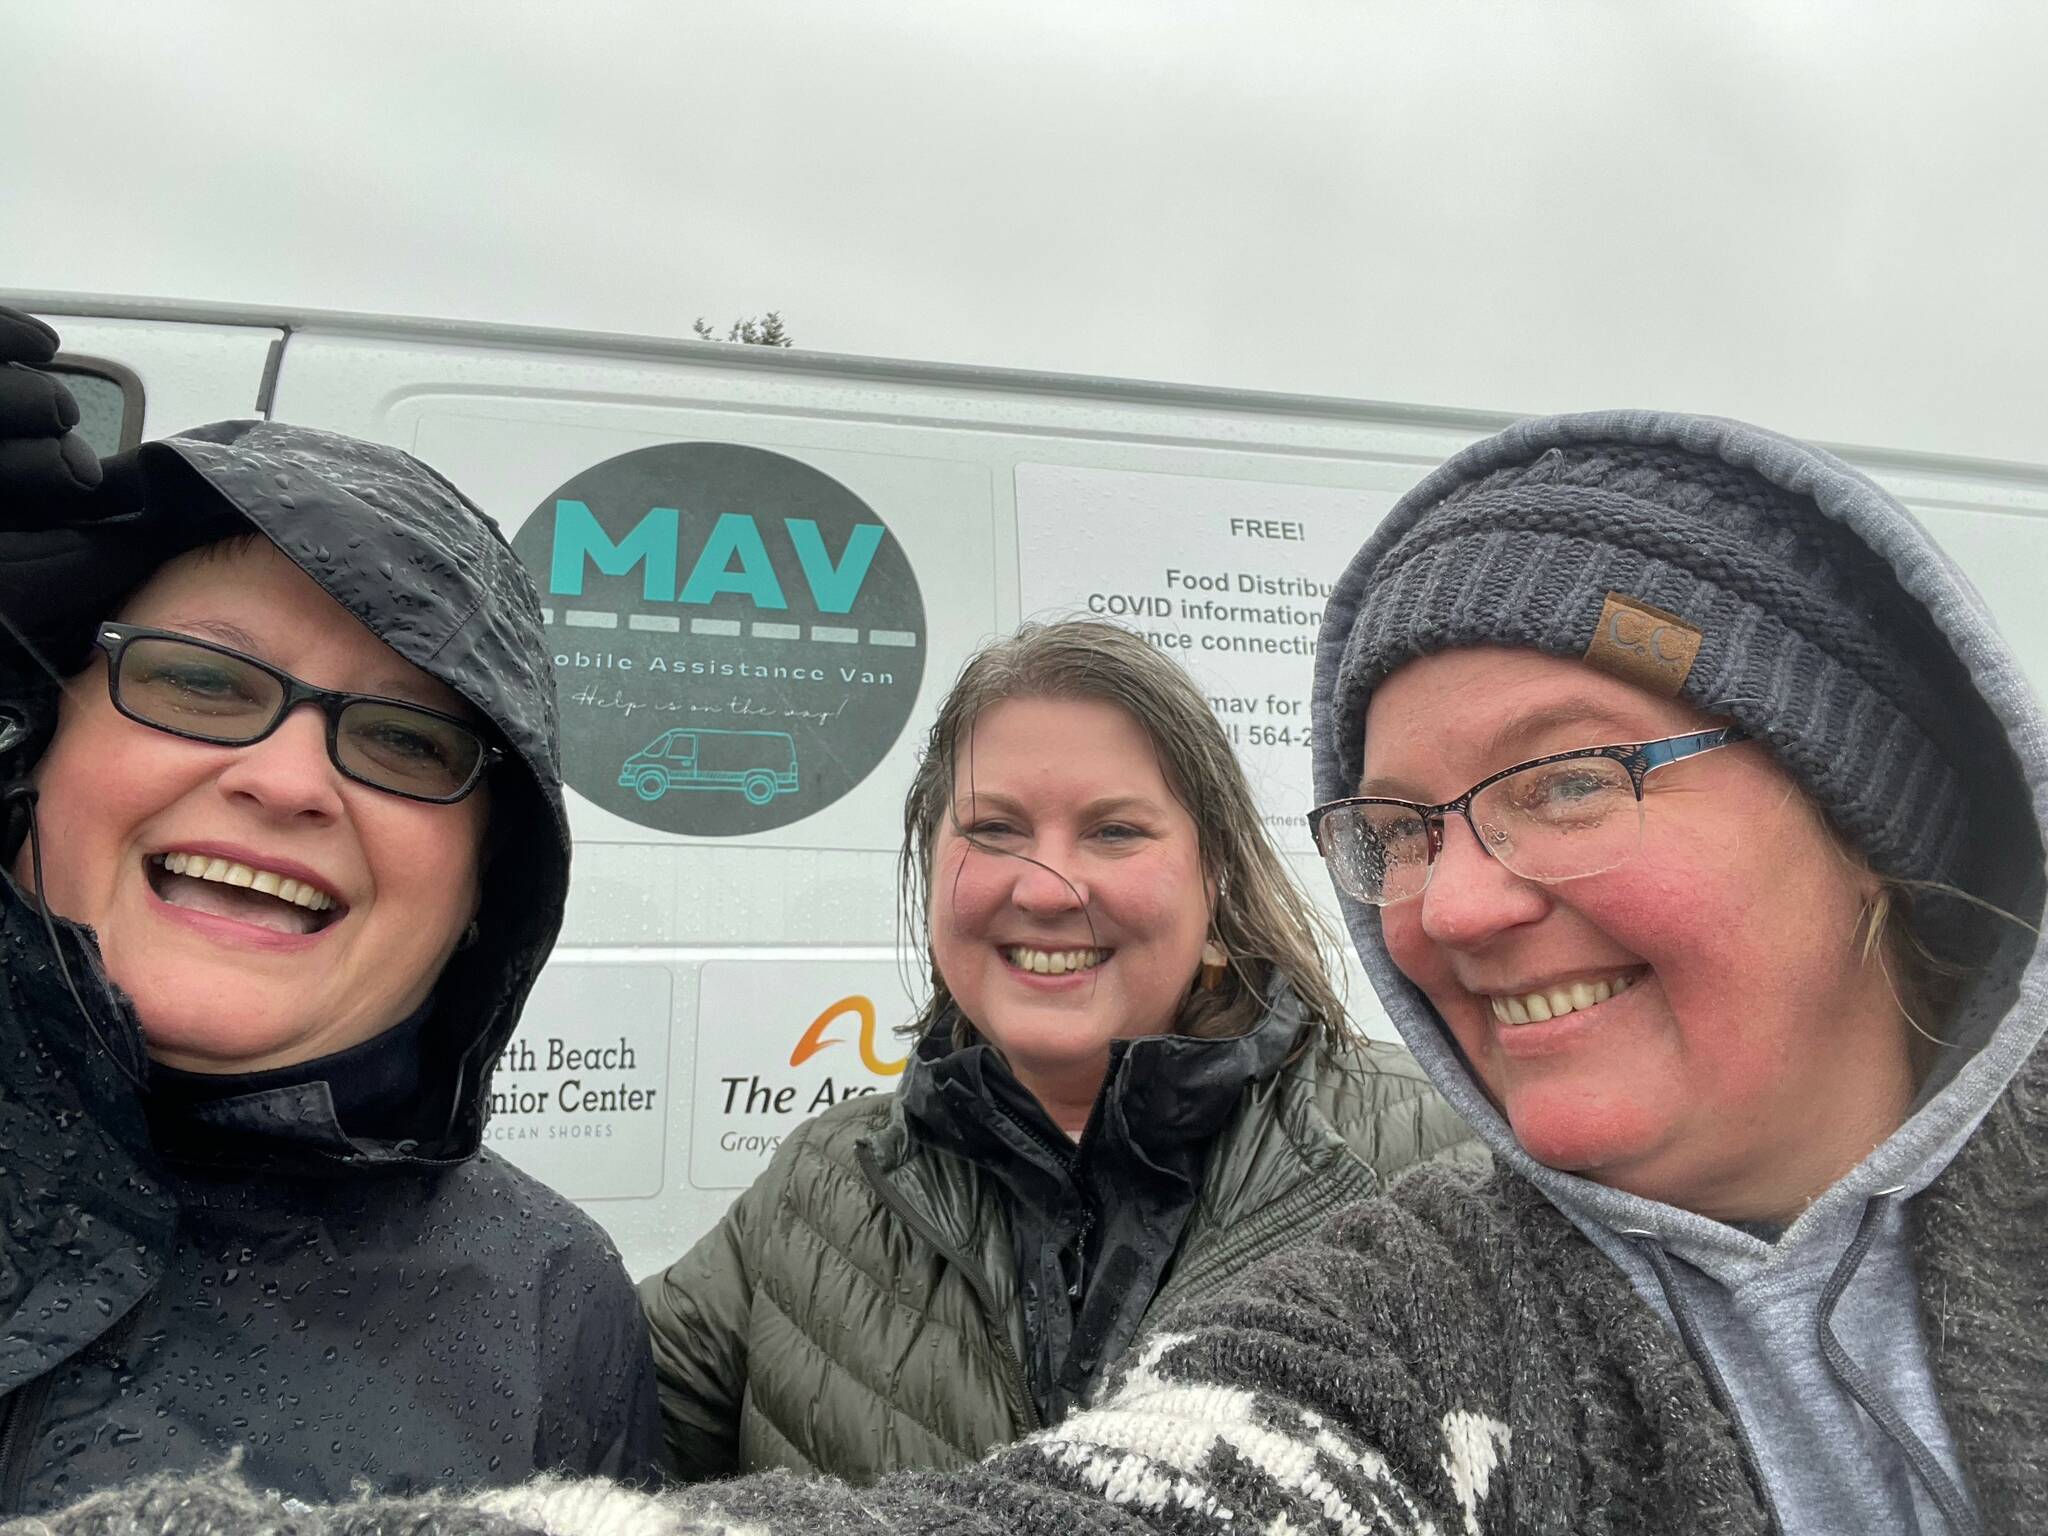 Photo: Christina Stensrud
O3A employees Ingrid Henden, left, and Marki Lockhart, center, joined MAV operator Christina Stensrud of the North Beach Senior Center at the recent whale welcoming ceremony in LaPush.